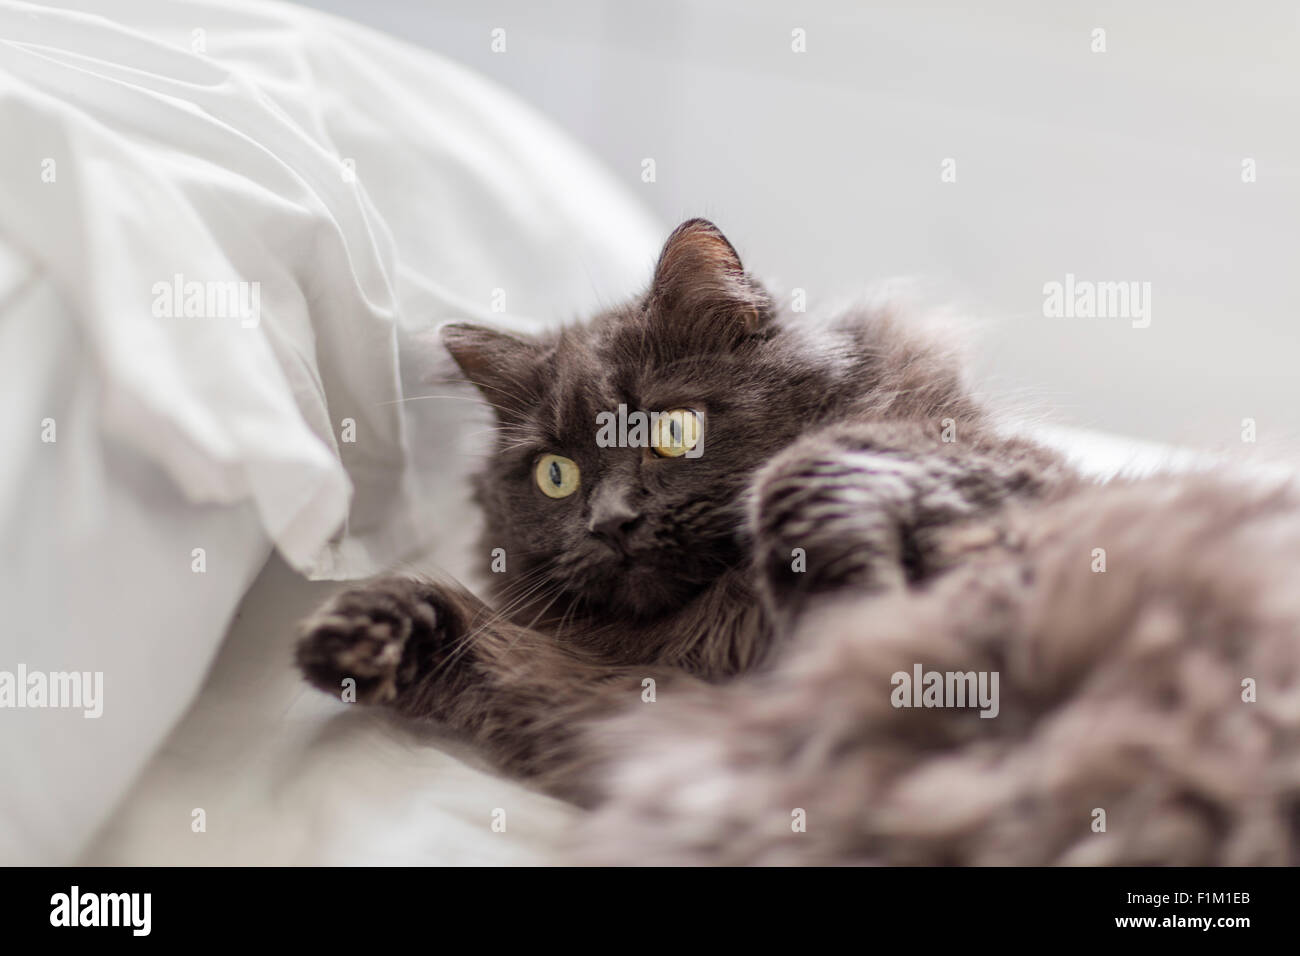 Grey persian cat in playful mood on a bed and showing its front two paws. Bright green eyes looking attentive Stock Photo